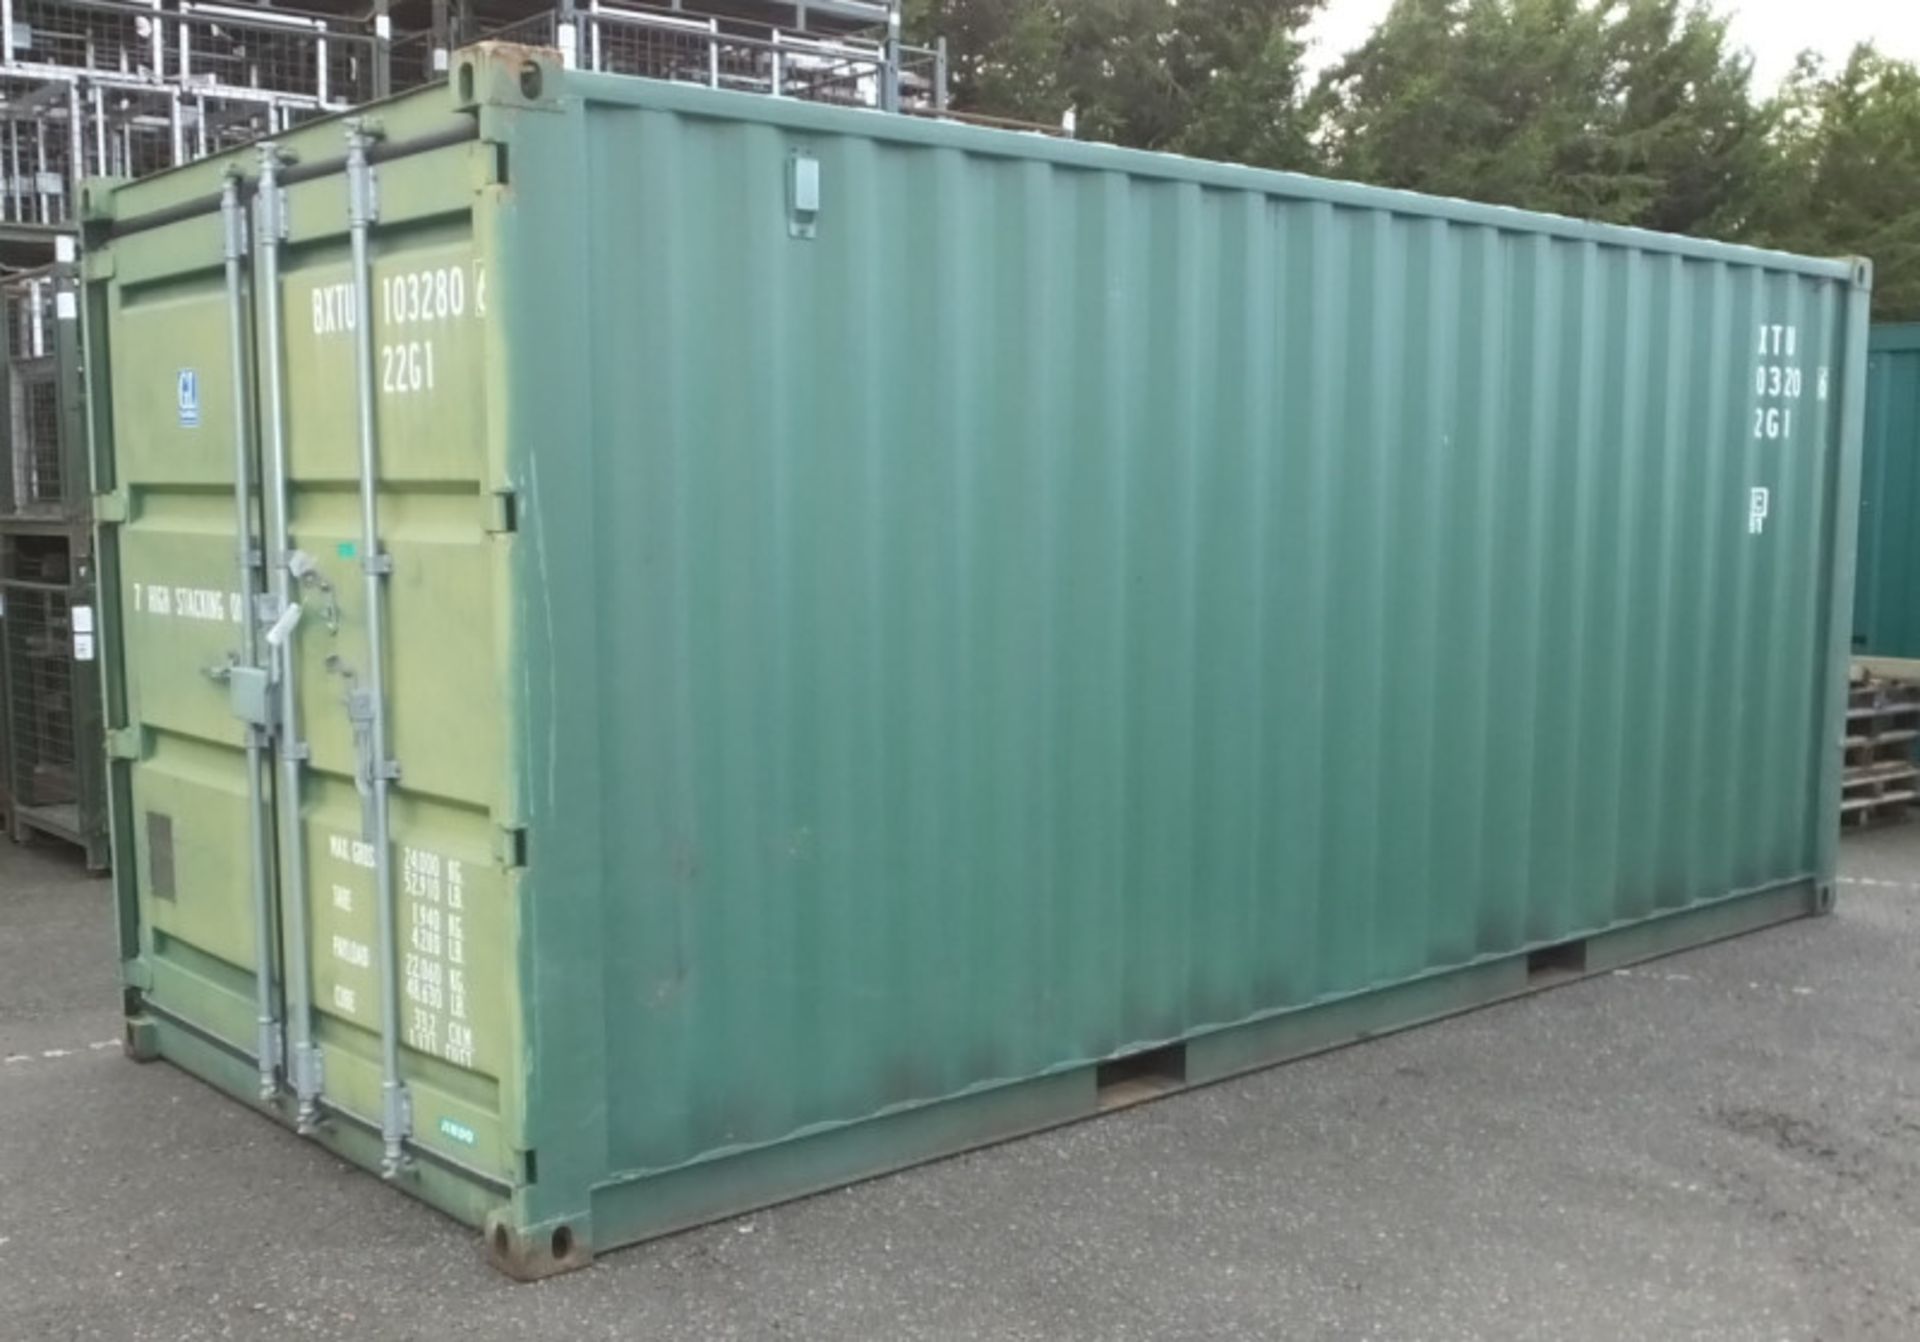 20ft ISO container - green - Type US-D240W - racking included - - LOCATED AT OUR CROFT SITE